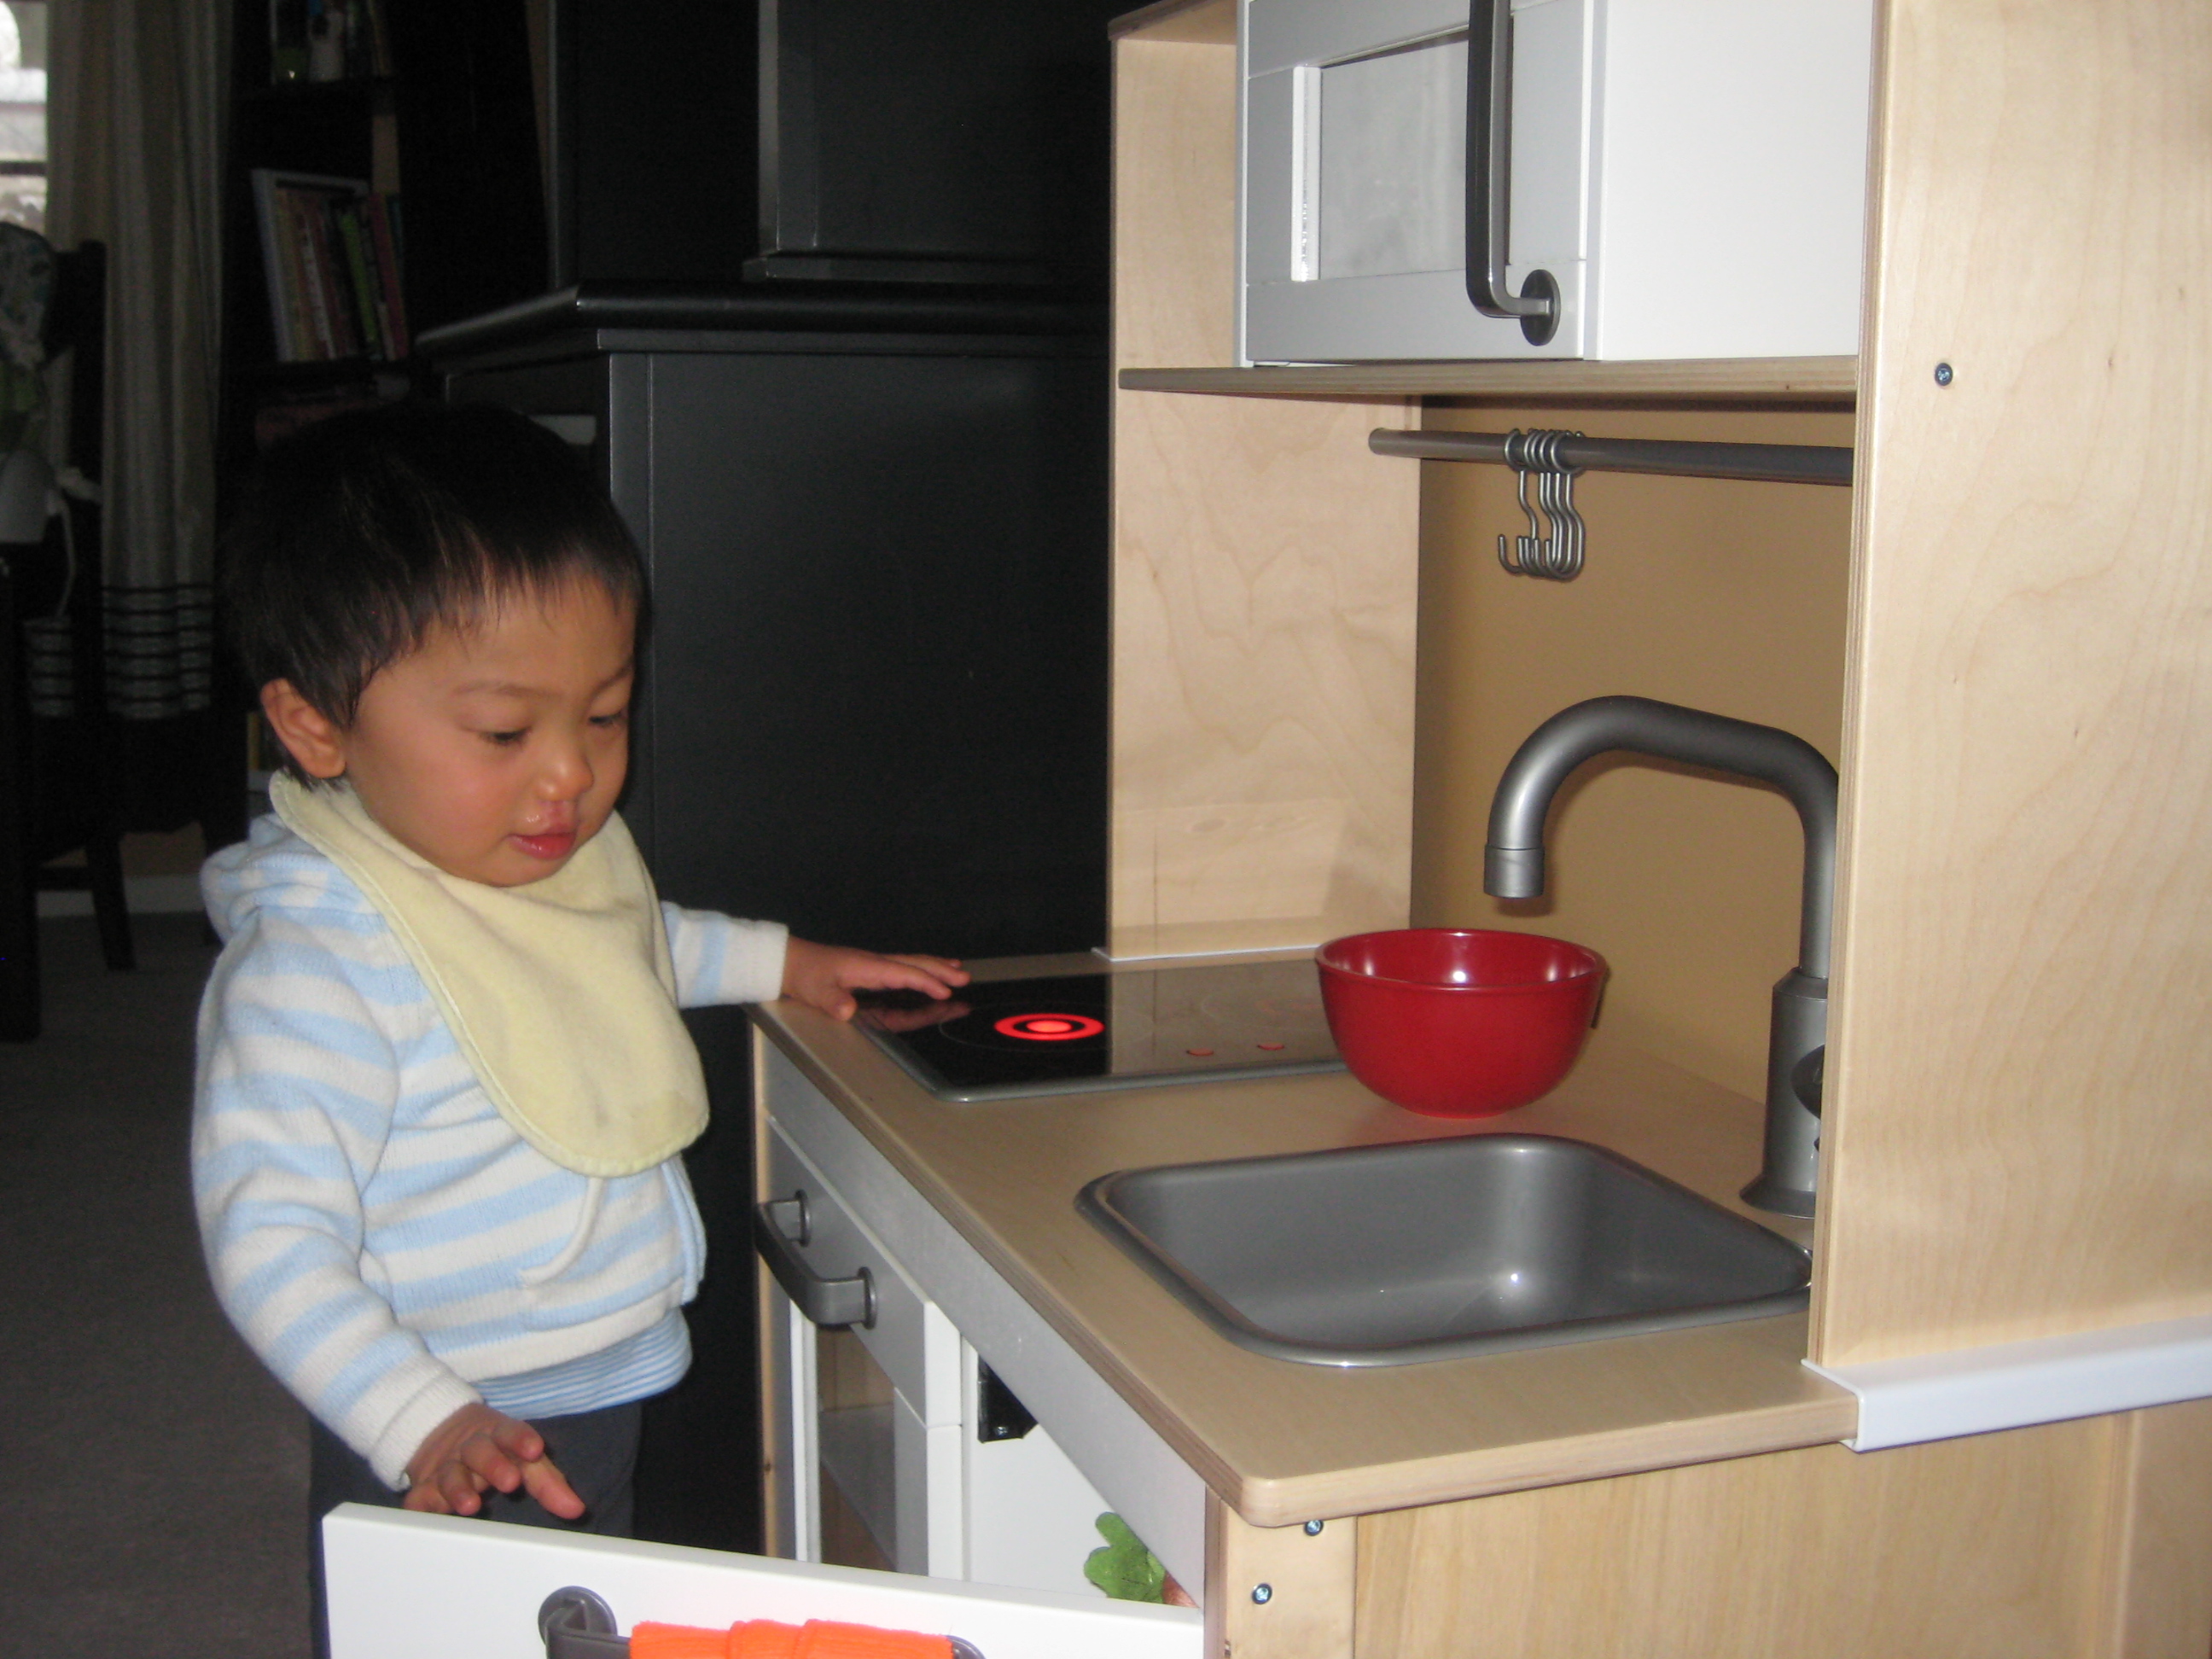 Testing out his new kitchen